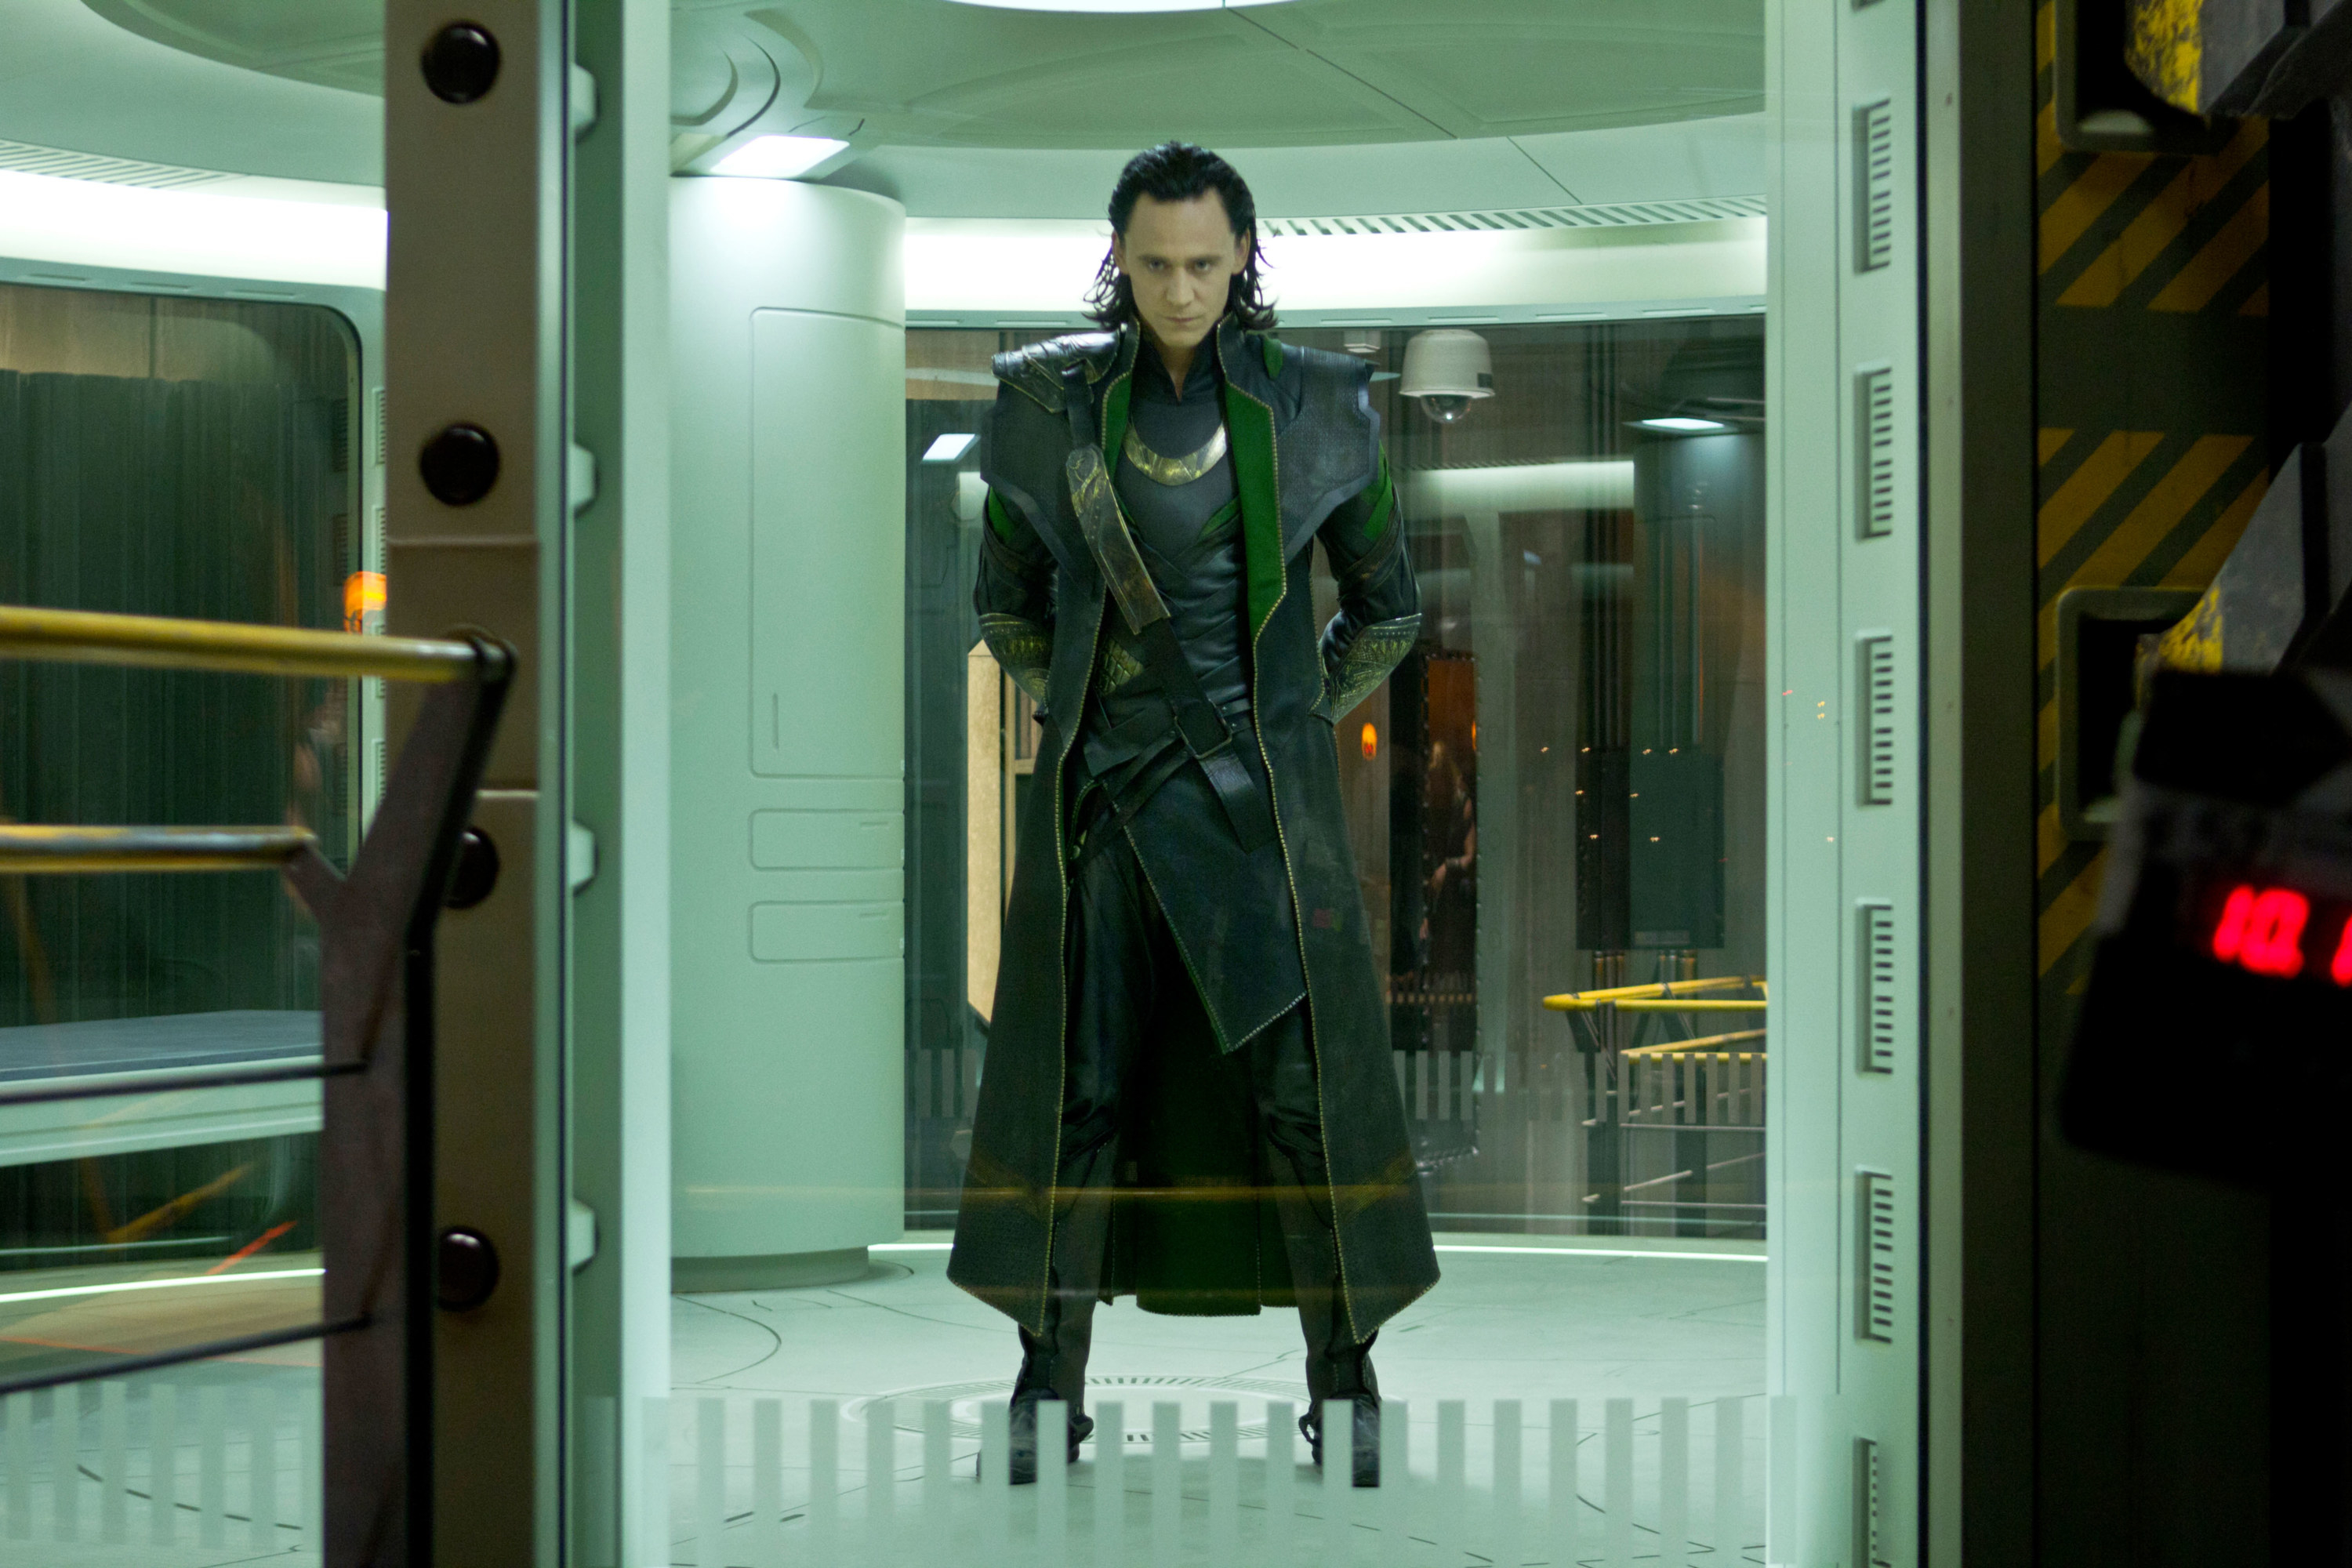 Loki wearing his classic outfit